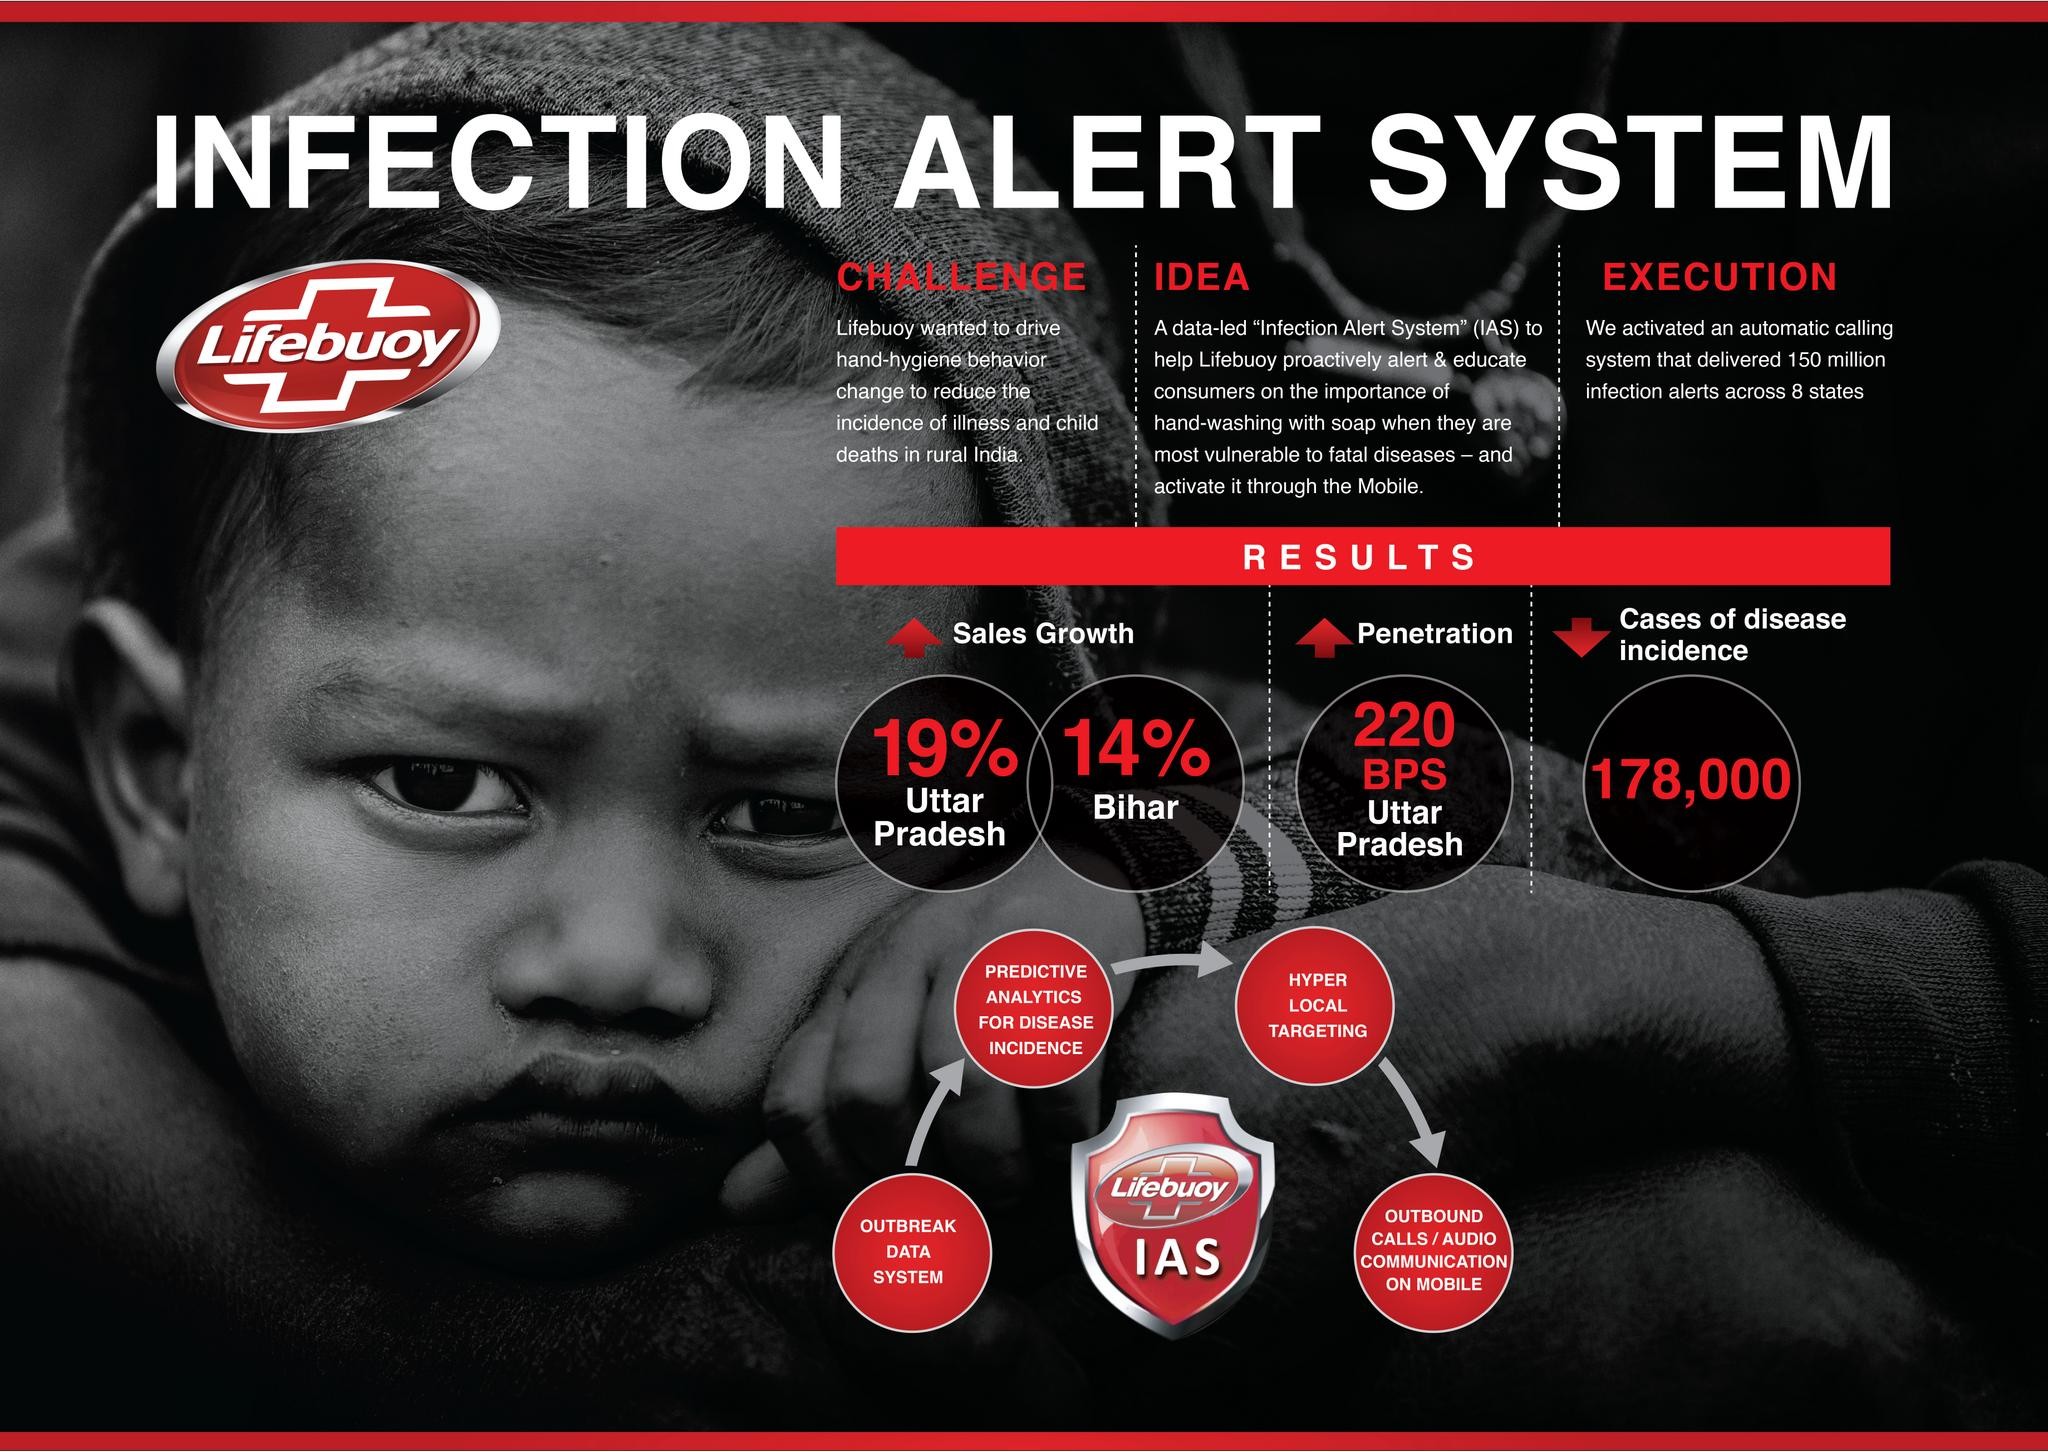 The Infection Alert System